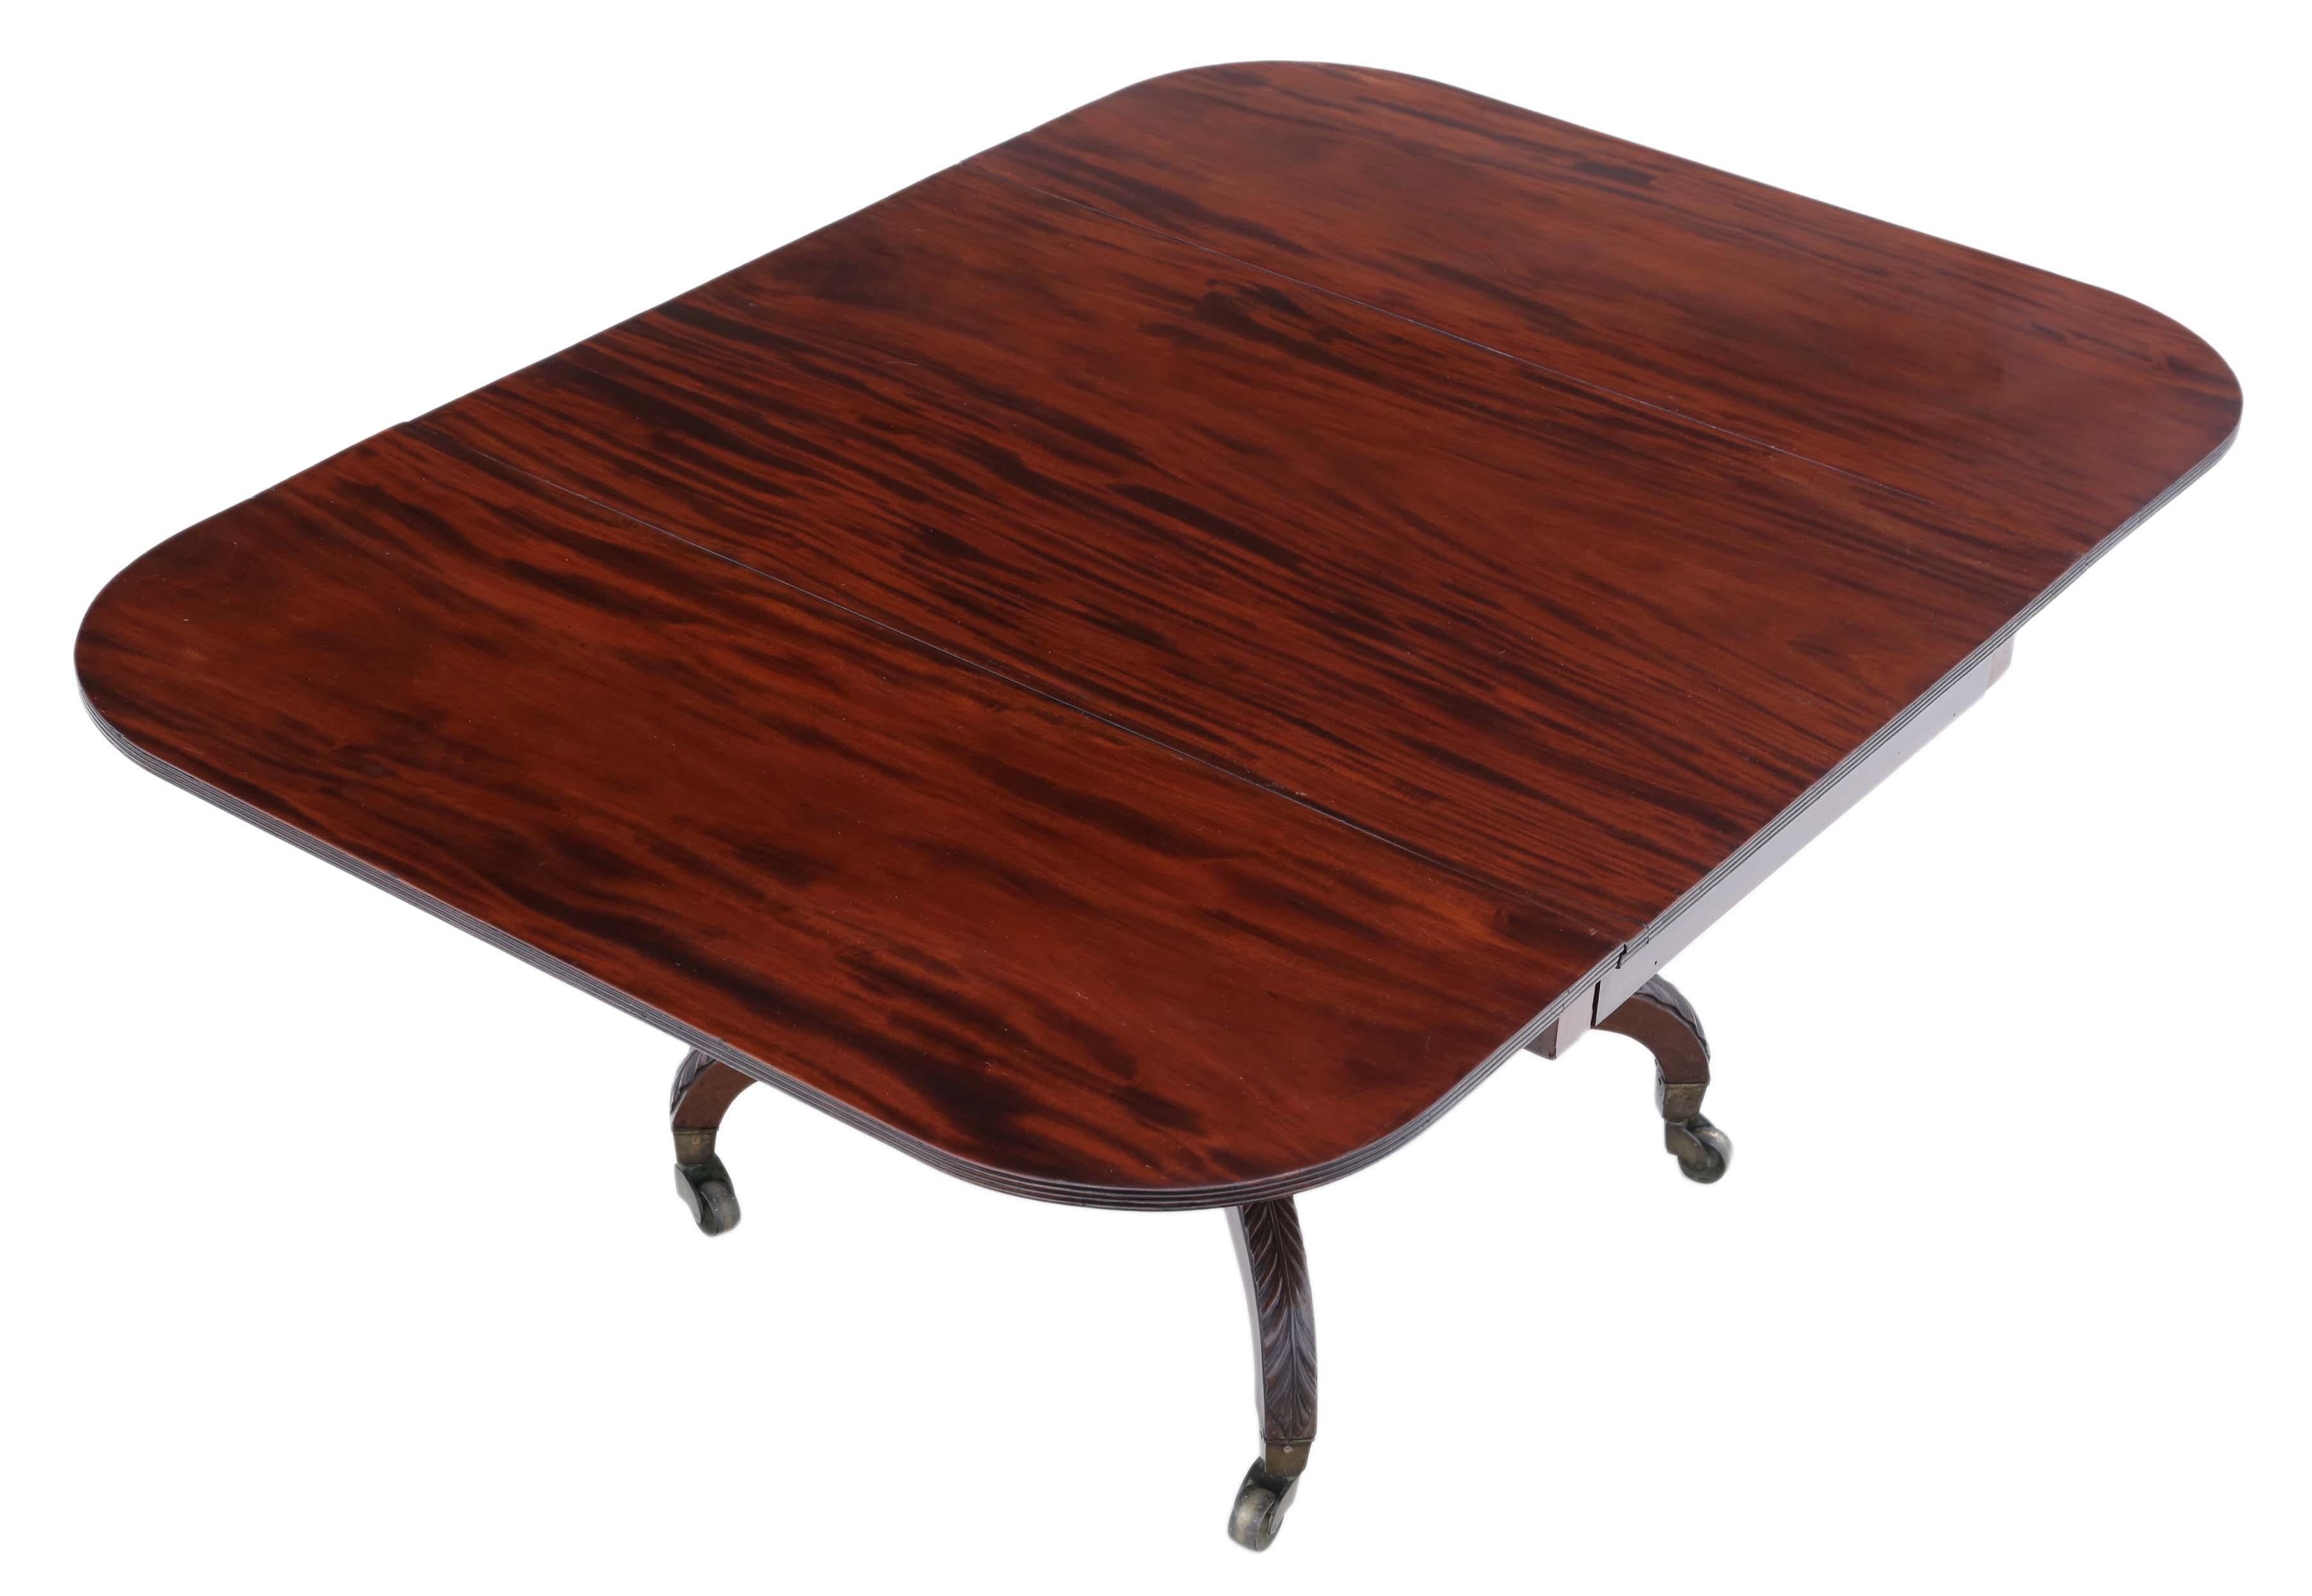 Early 19th Century Antique Regency circa 1825 Cuban Mahogany Drop-Leaf Dining Table For Sale